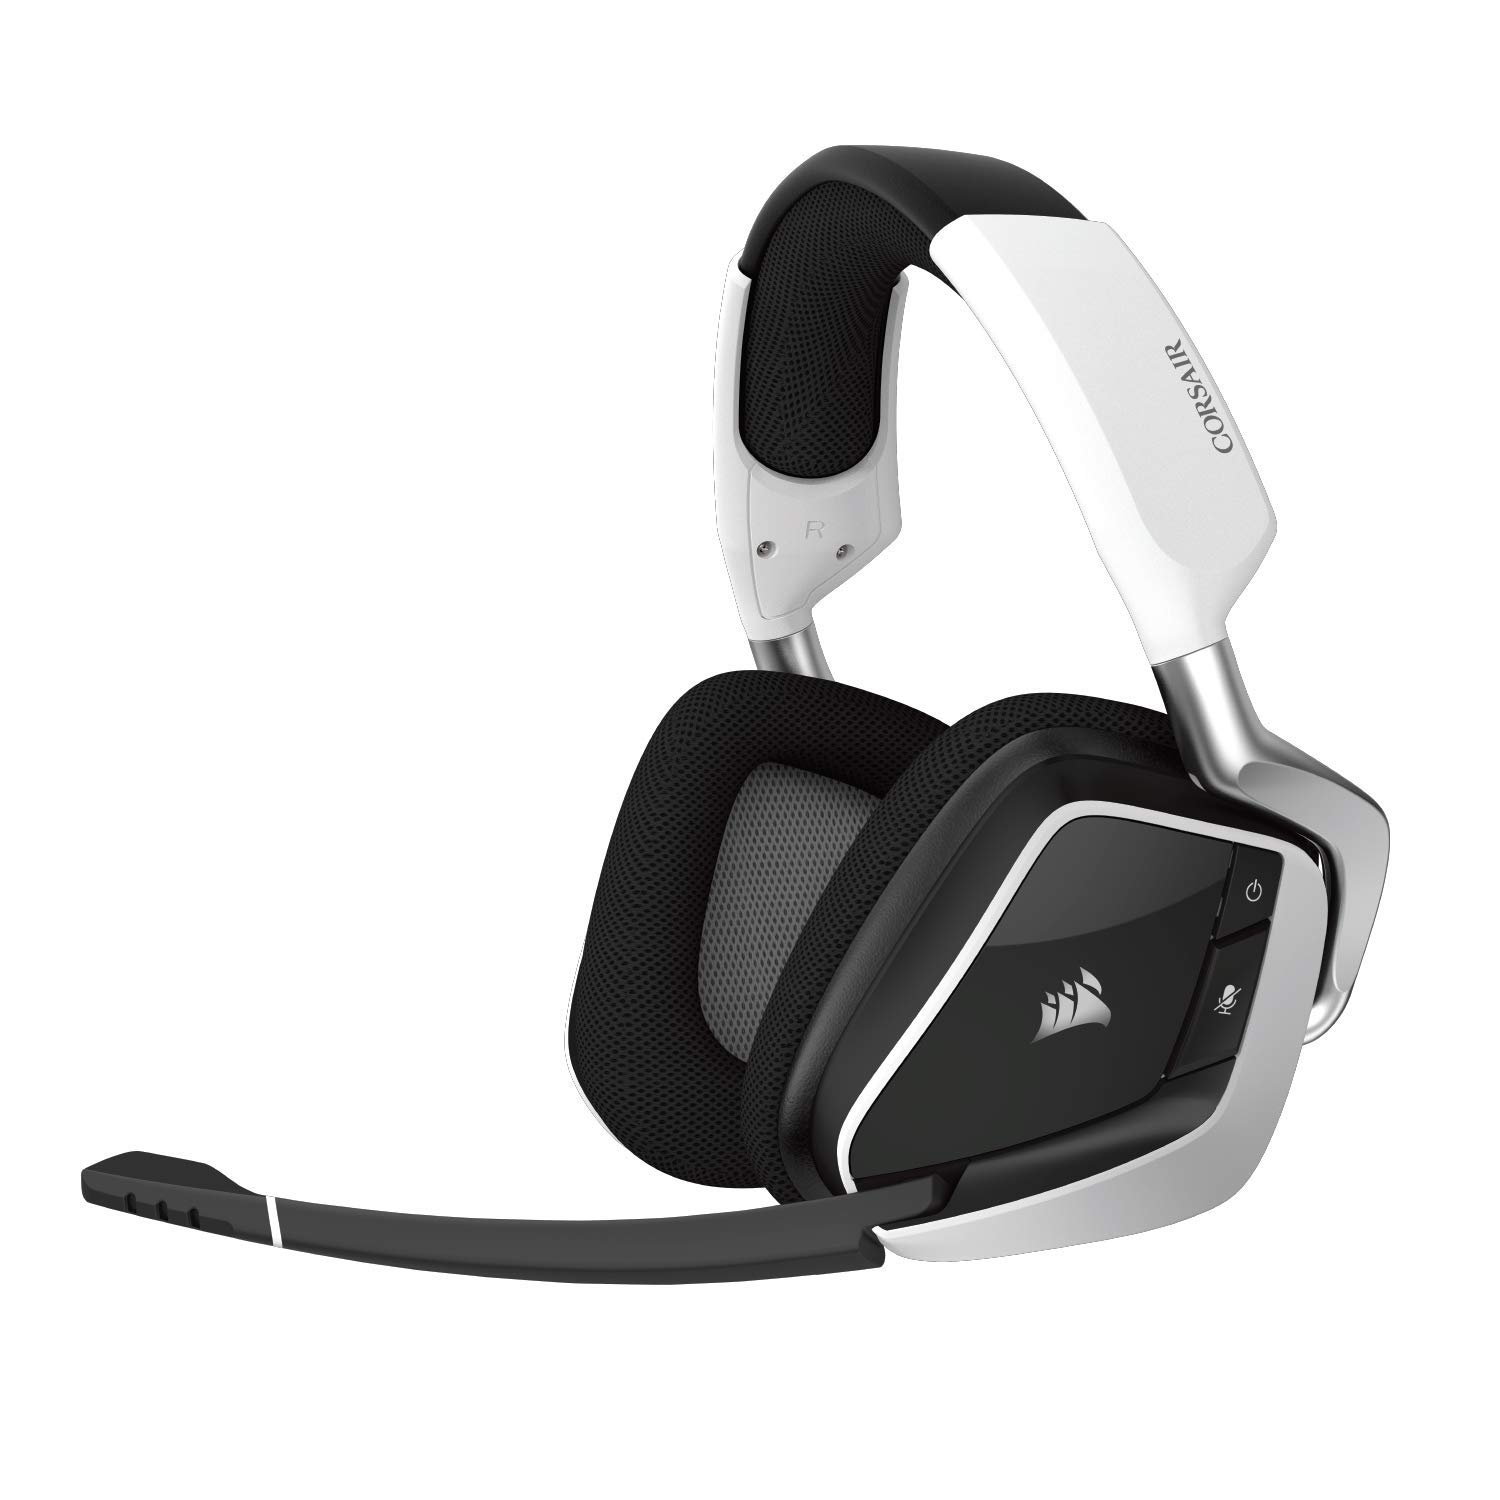 CORSAIR Void PRO RGB Wireless Gaming Headset - Dolby 7.1 Surround Sound Headphones for PC - Discord Certified - 50mm Drivers - White